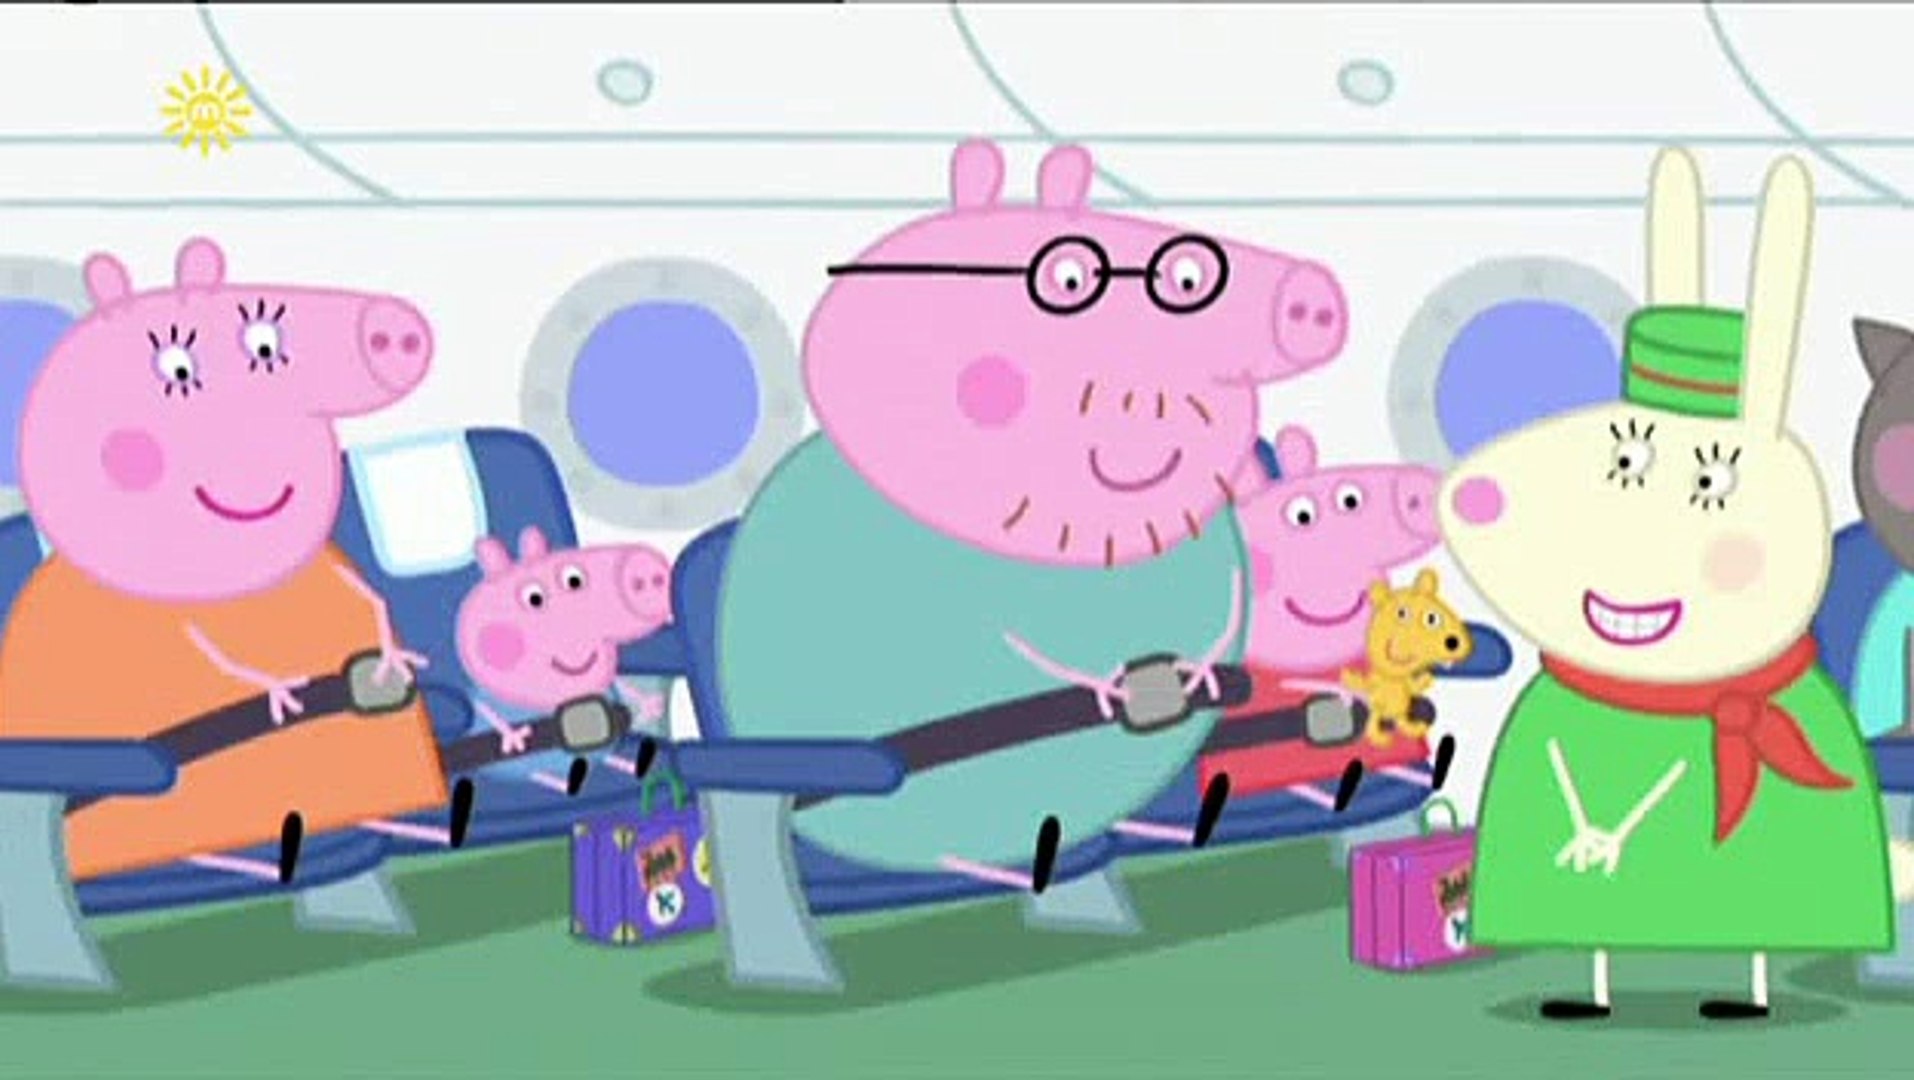 Peppa Pig. The Holiday House. Mummy Pig and Daddy Pig and George Pig